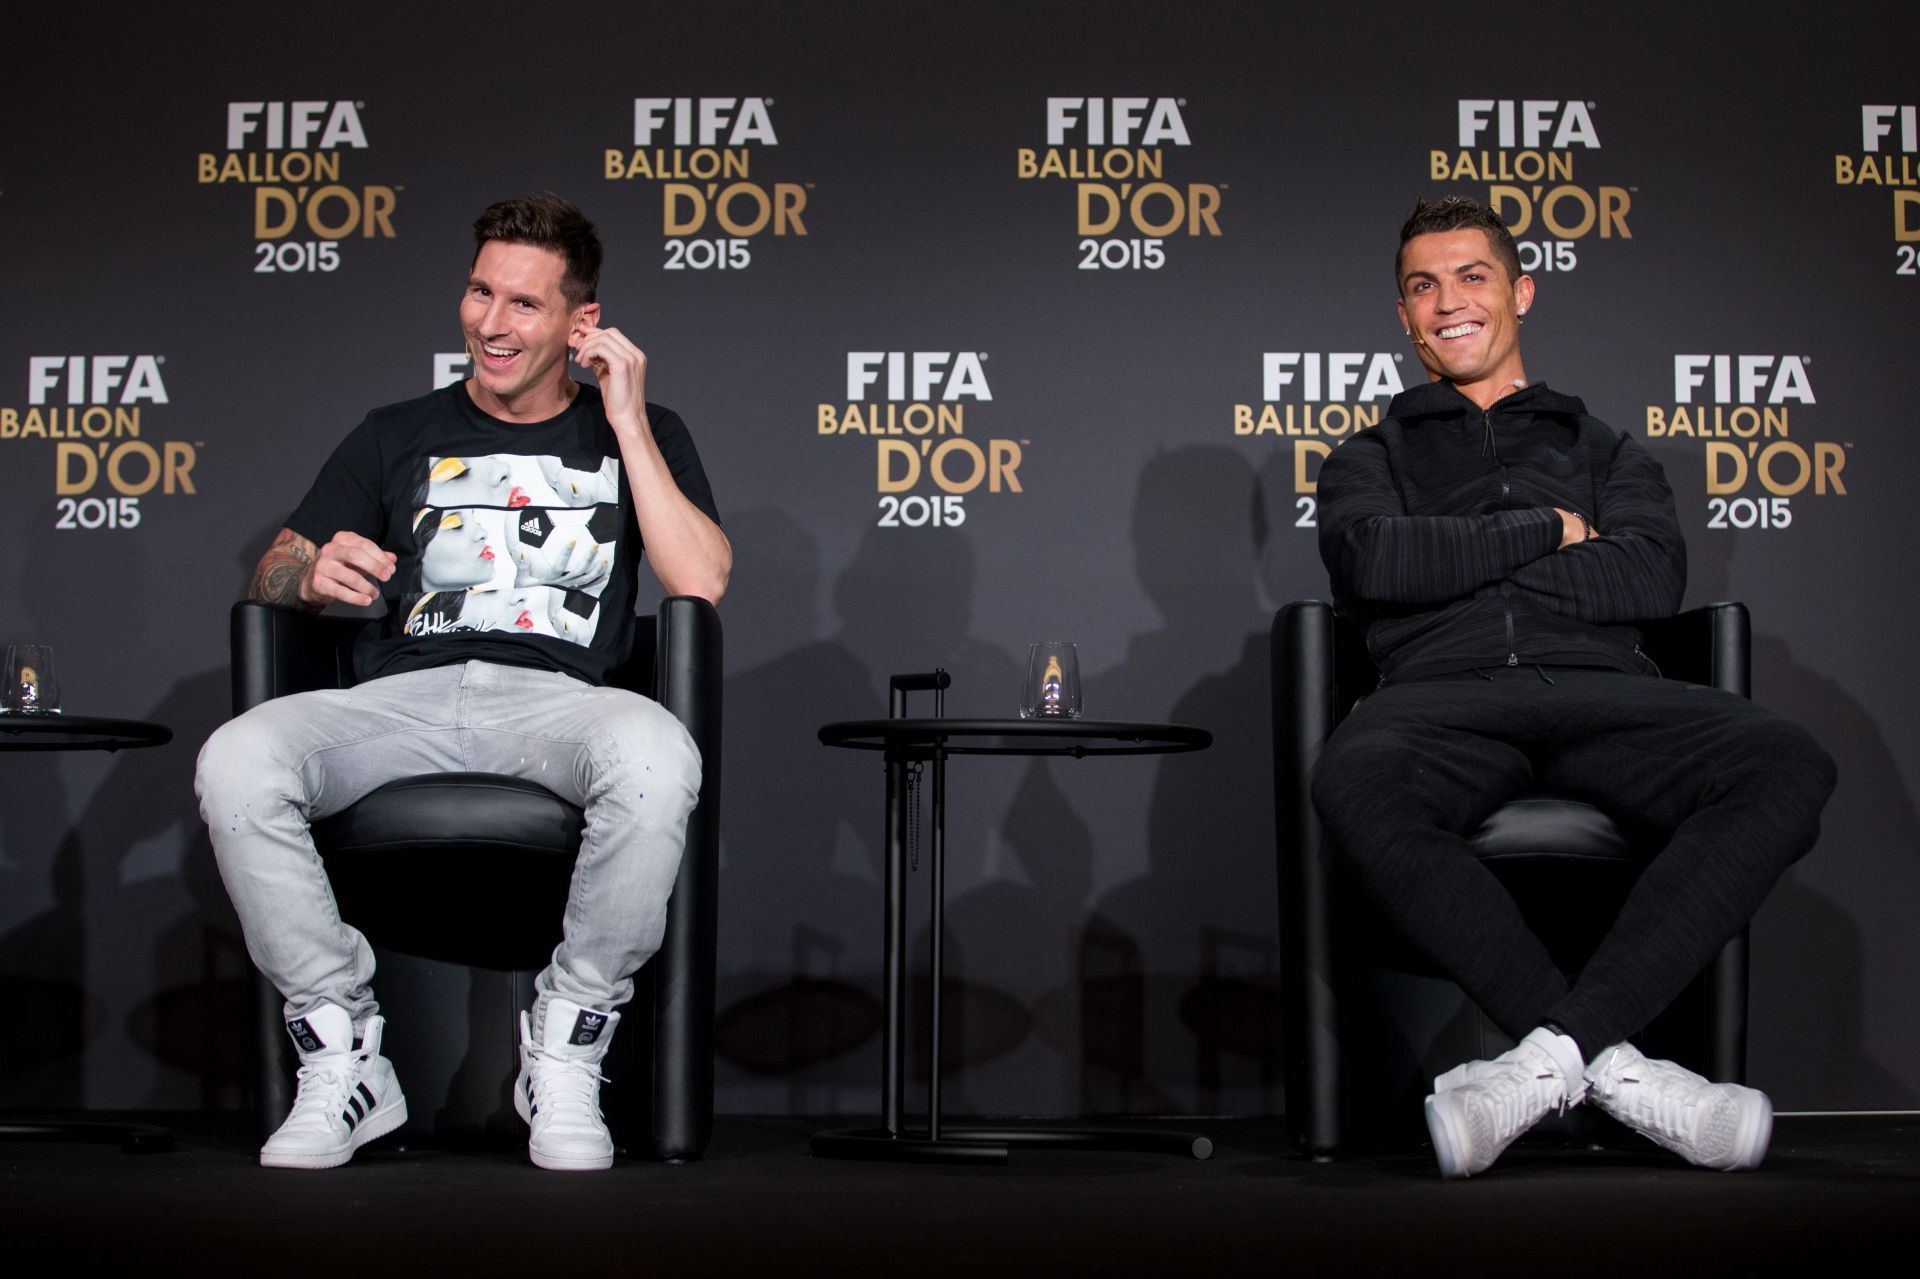 Messi and Ronaldo will go down as two of the greatest